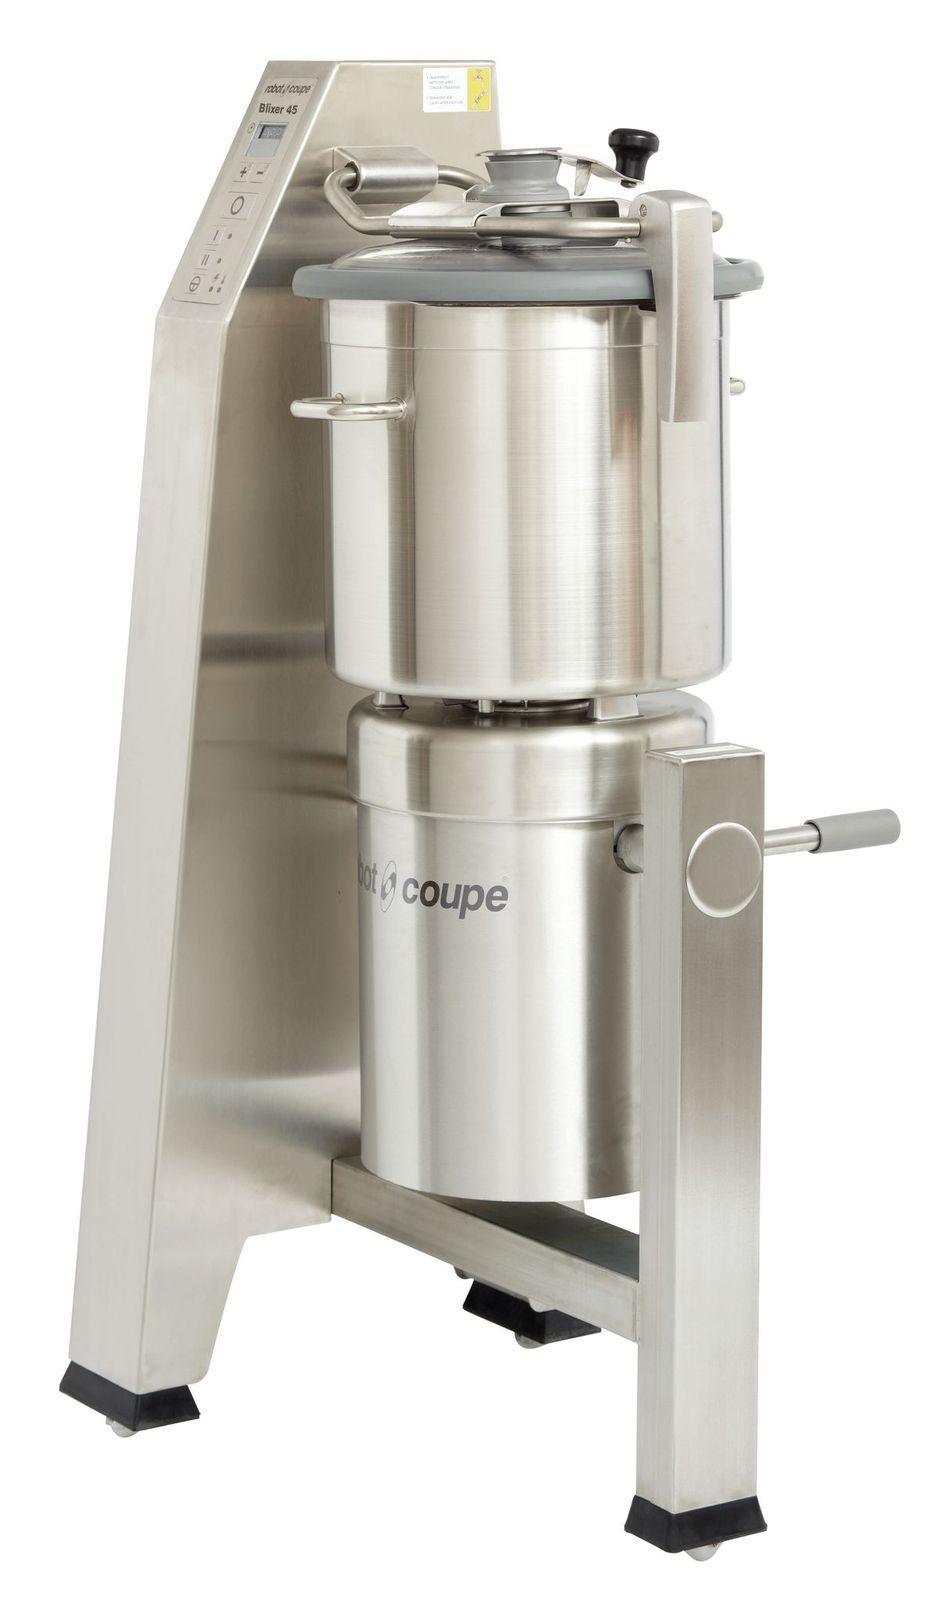 Robot Coupe Blixer 23 Vertical Food Processor with 23L Stainless Steel Bowl Mixer - HospoStore